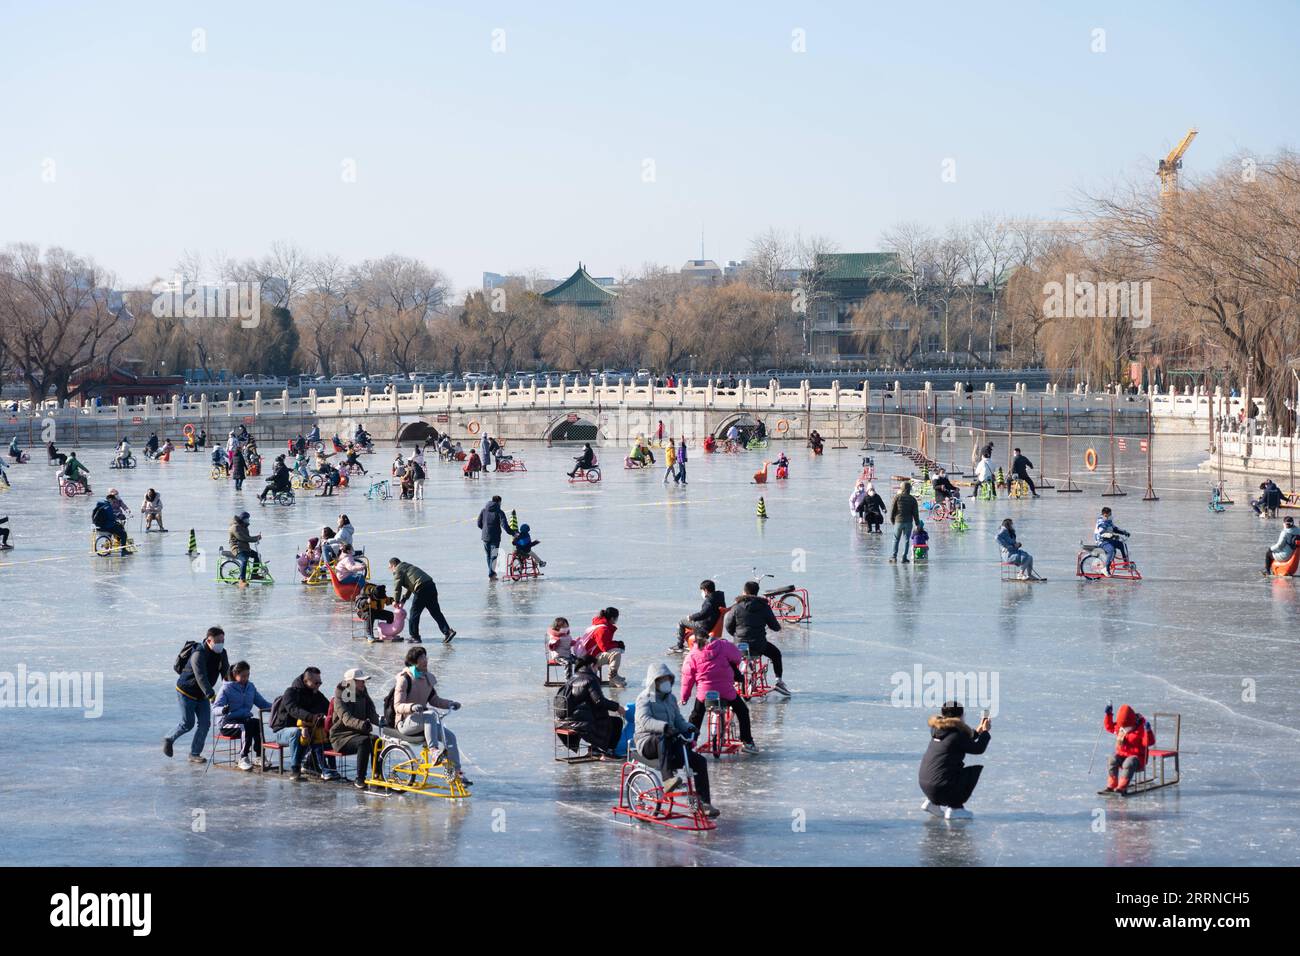 230103 -- BEIJING, Jan. 3, 2023 -- People have fun on the ice rink at Beihai Park in Beijing, capital of China, Dec. 31, 2022.  Xinhua Headlines: China sees New Year consumption recovery, eyes 2023 growth ChenxZhonghao PUBLICATIONxNOTxINxCHN Stock Photo